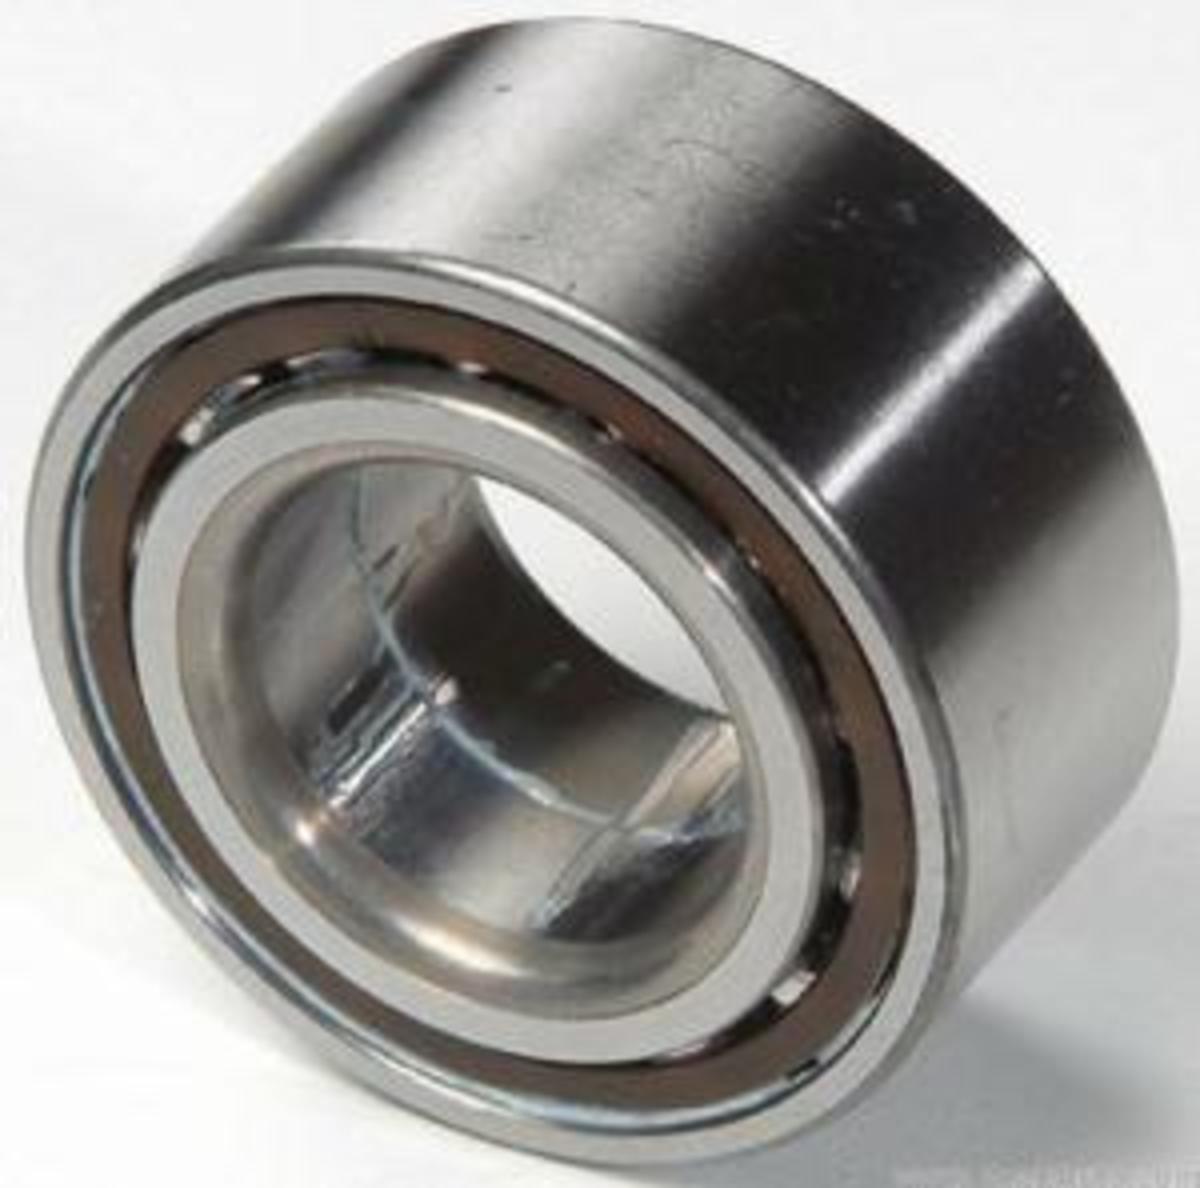 How do you know if a rear bearing needs replacement?